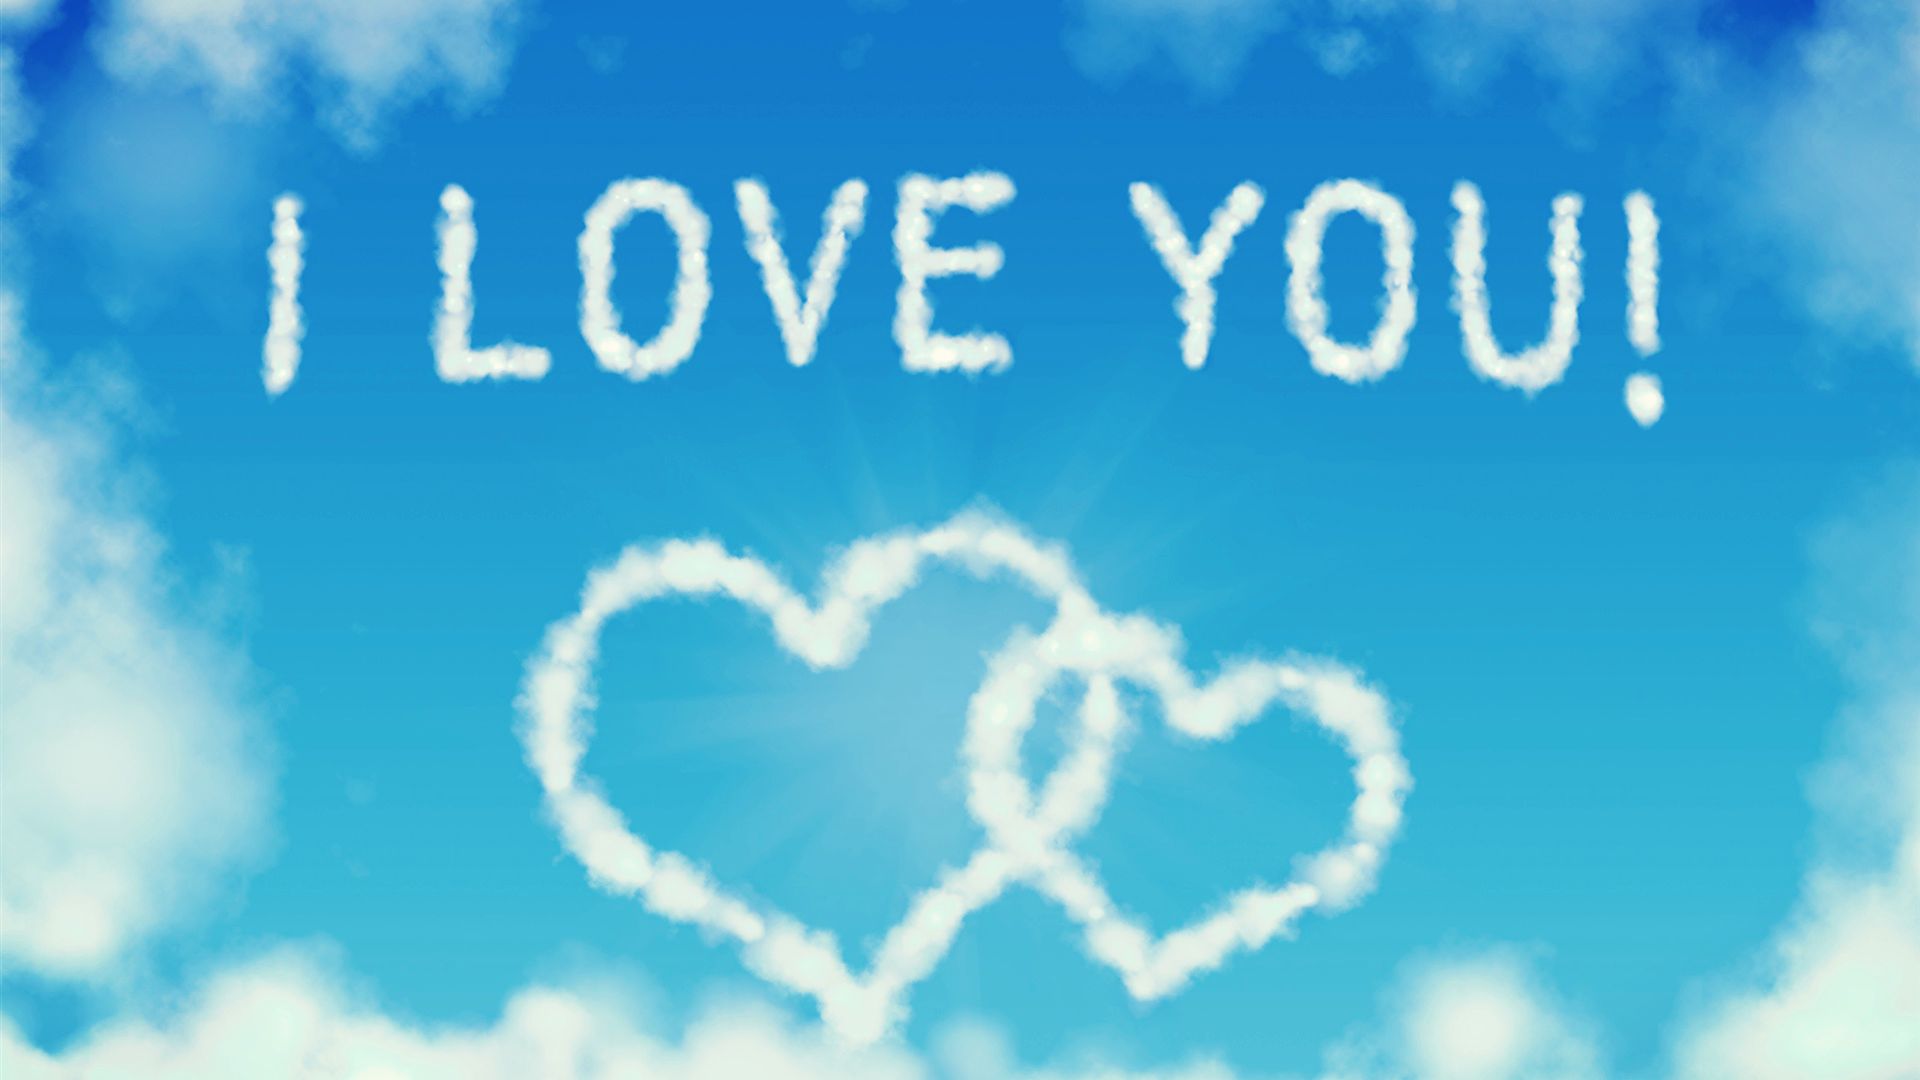 I Love You Wallpaper HD | Wallpapers, Backgrounds, Images, Art Photos.